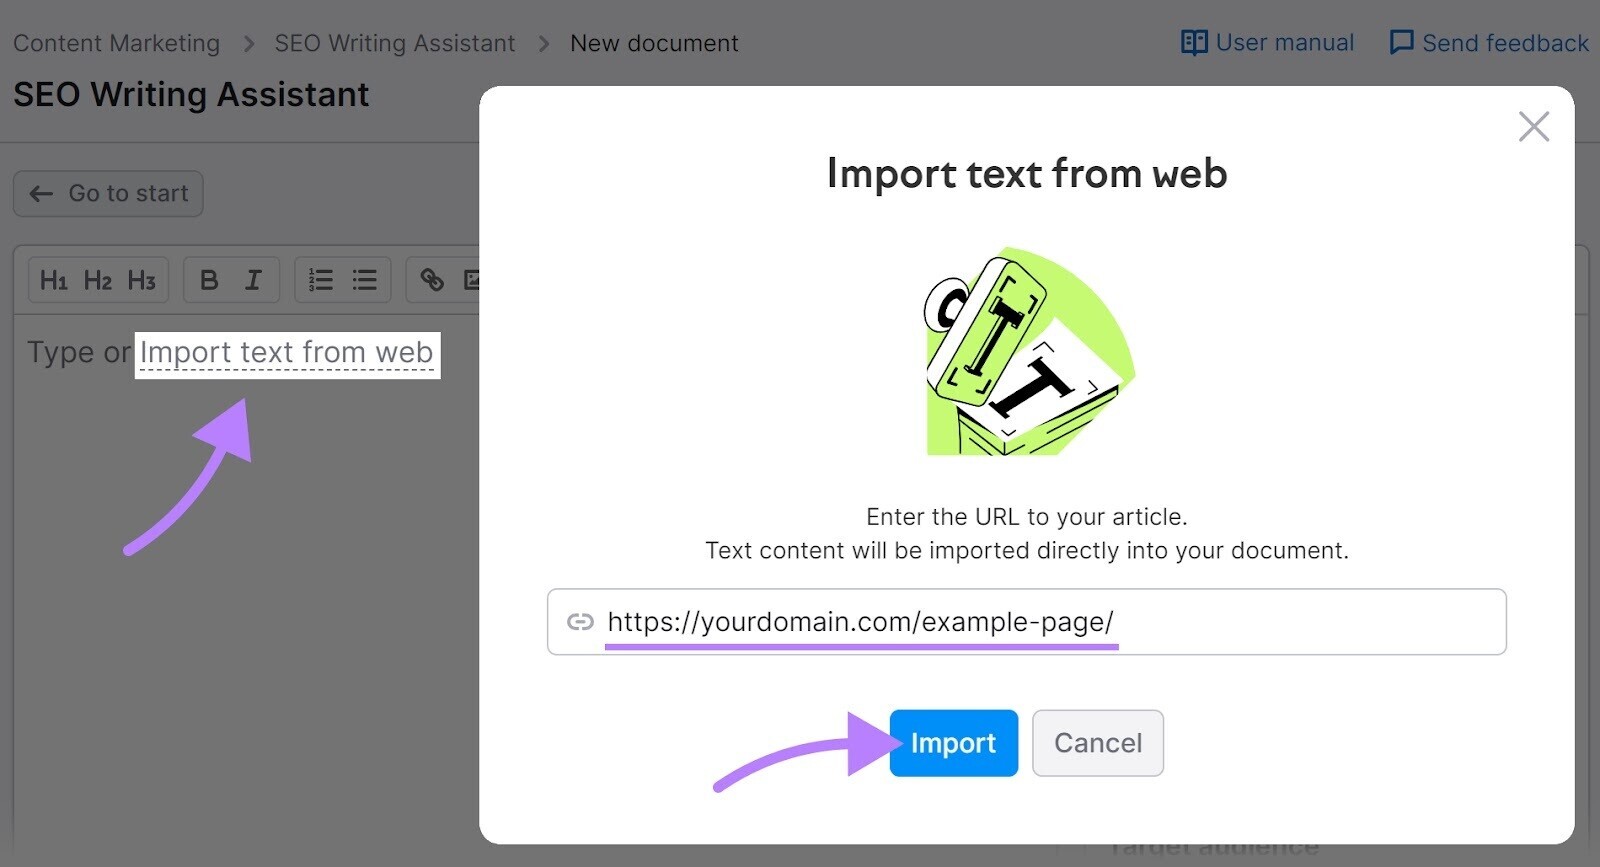 “Import text from web” box in SEO Writing Assistant tool